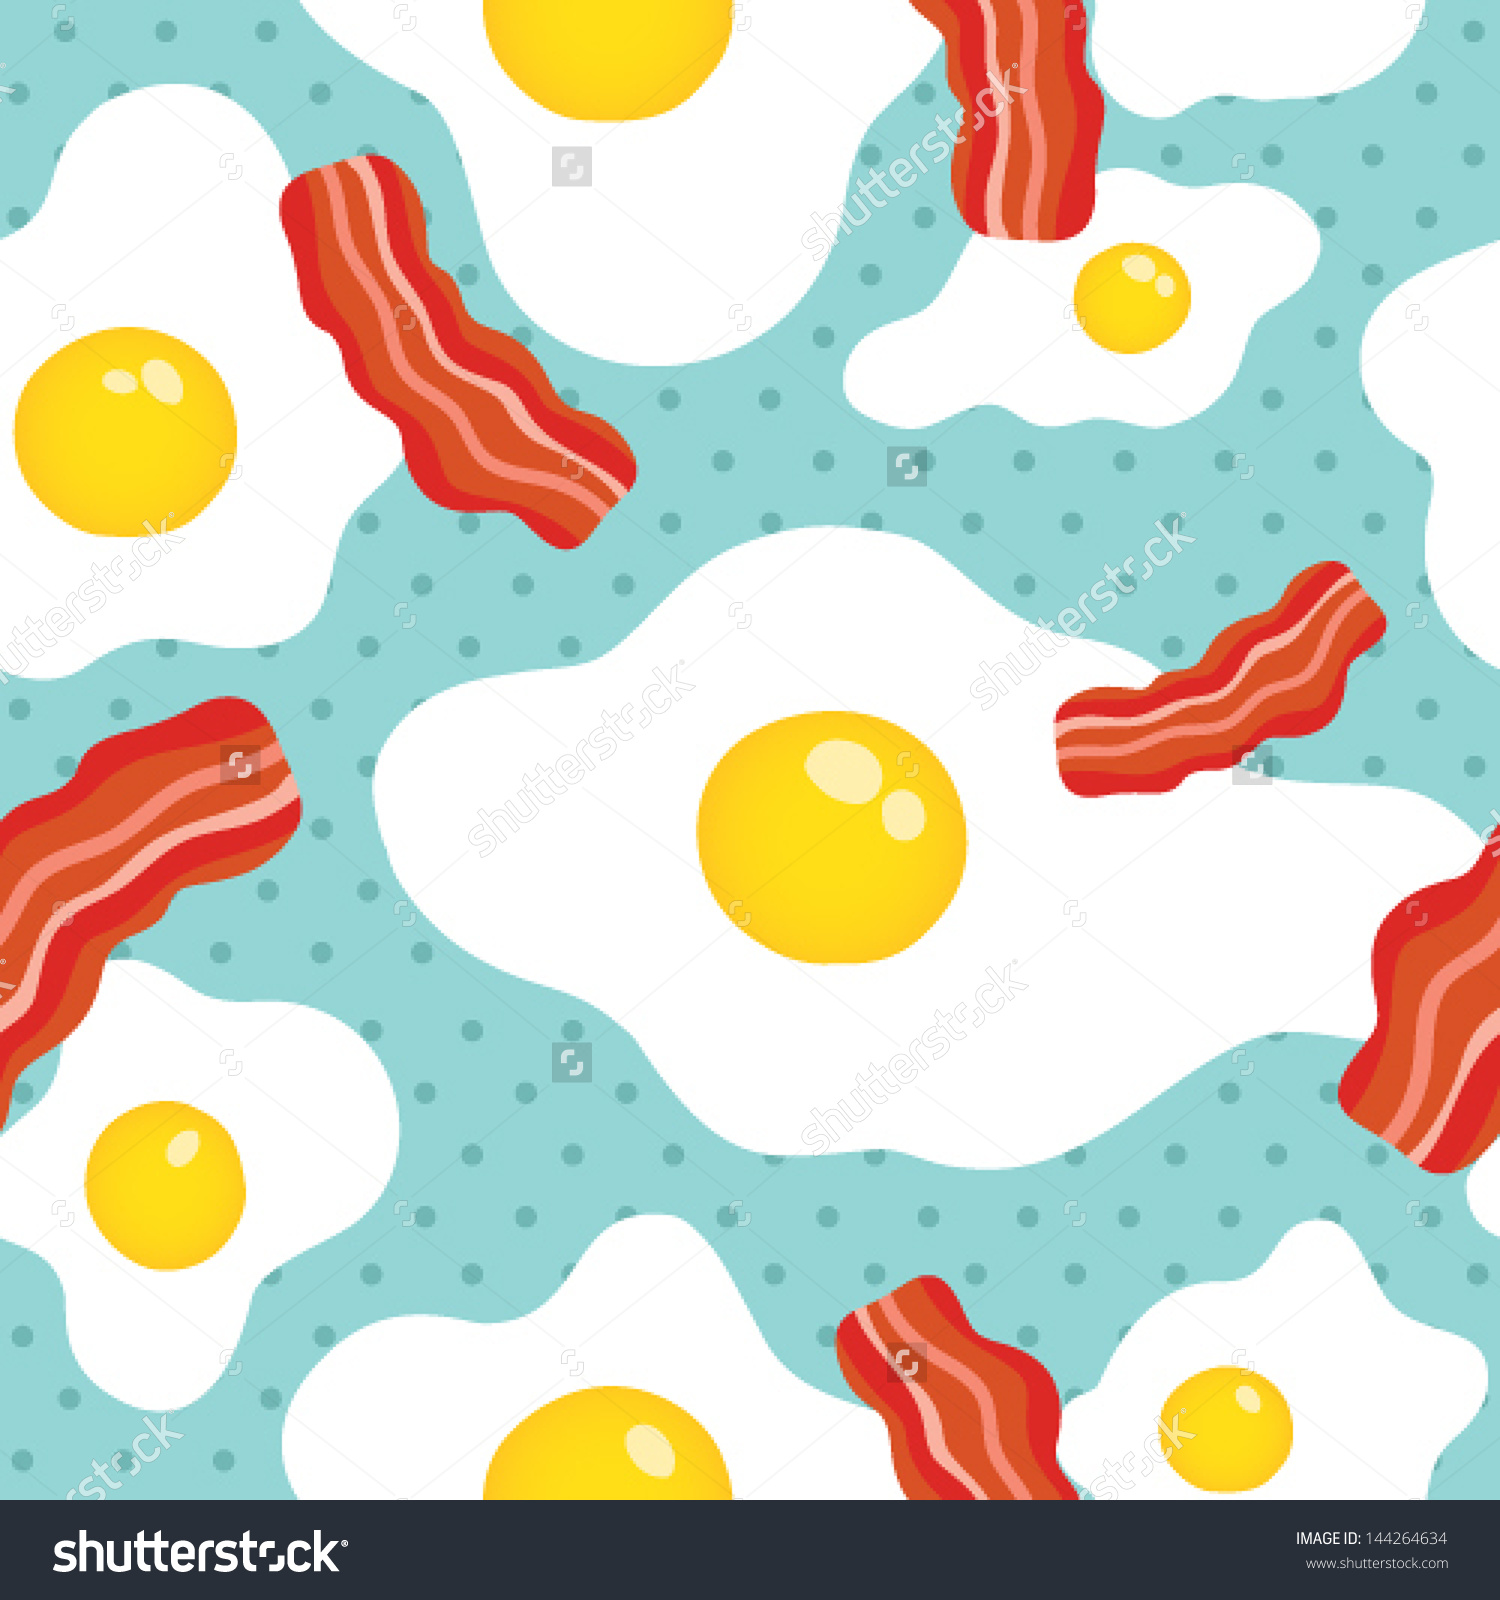 Images of wallpaper spacehero. Bacon clipart animated